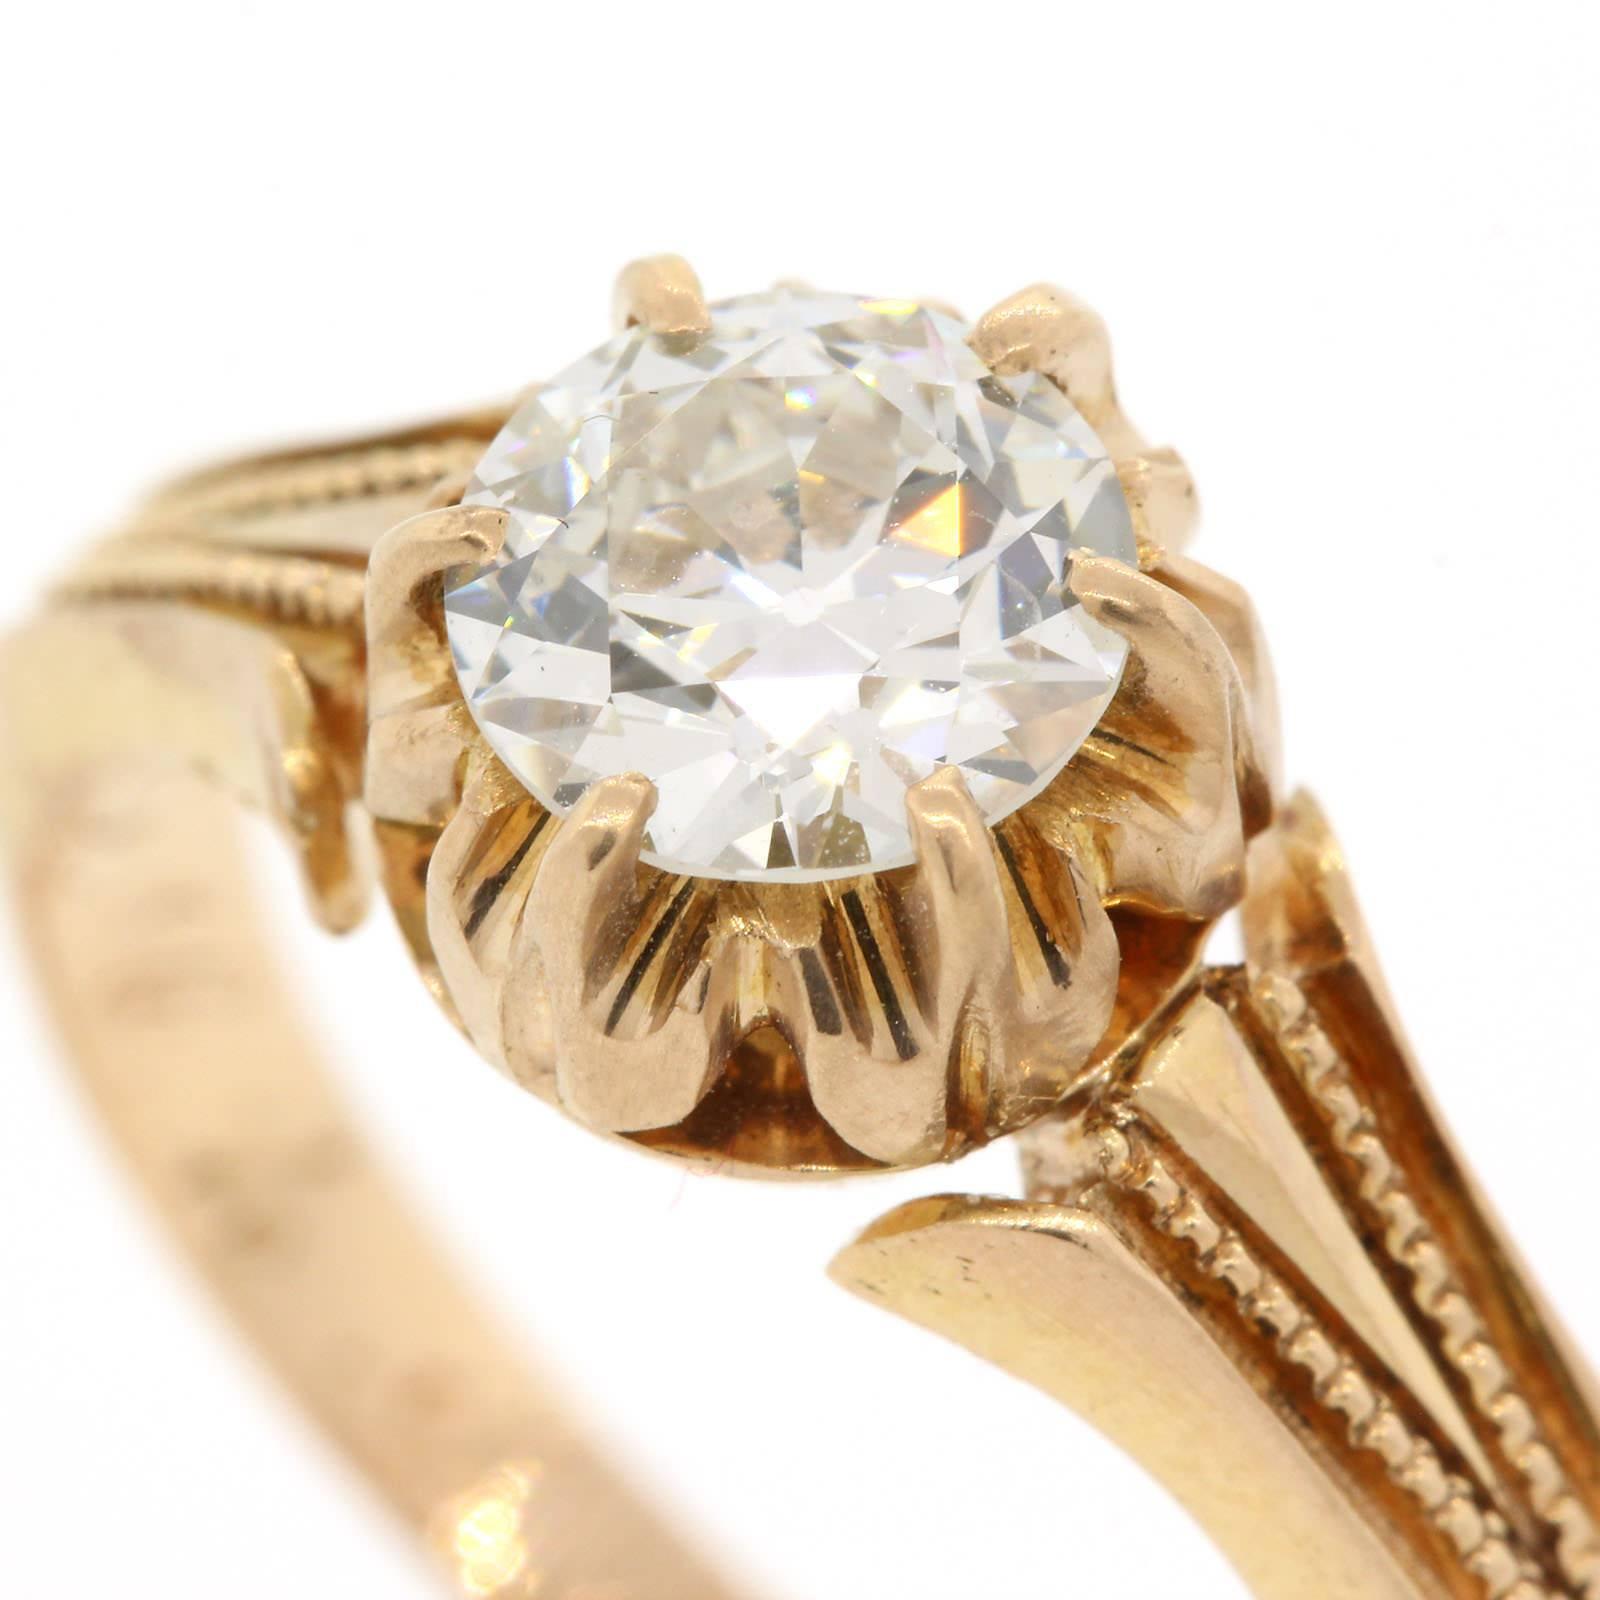 A gorgeous Victorian 14KT yellow ring set with 0.94 carat Old European Cut Diamond, certified F color - VS2 clarity.  The six prong setting is accentuated with beautifully coveted milgrain.  Circa 1890s.